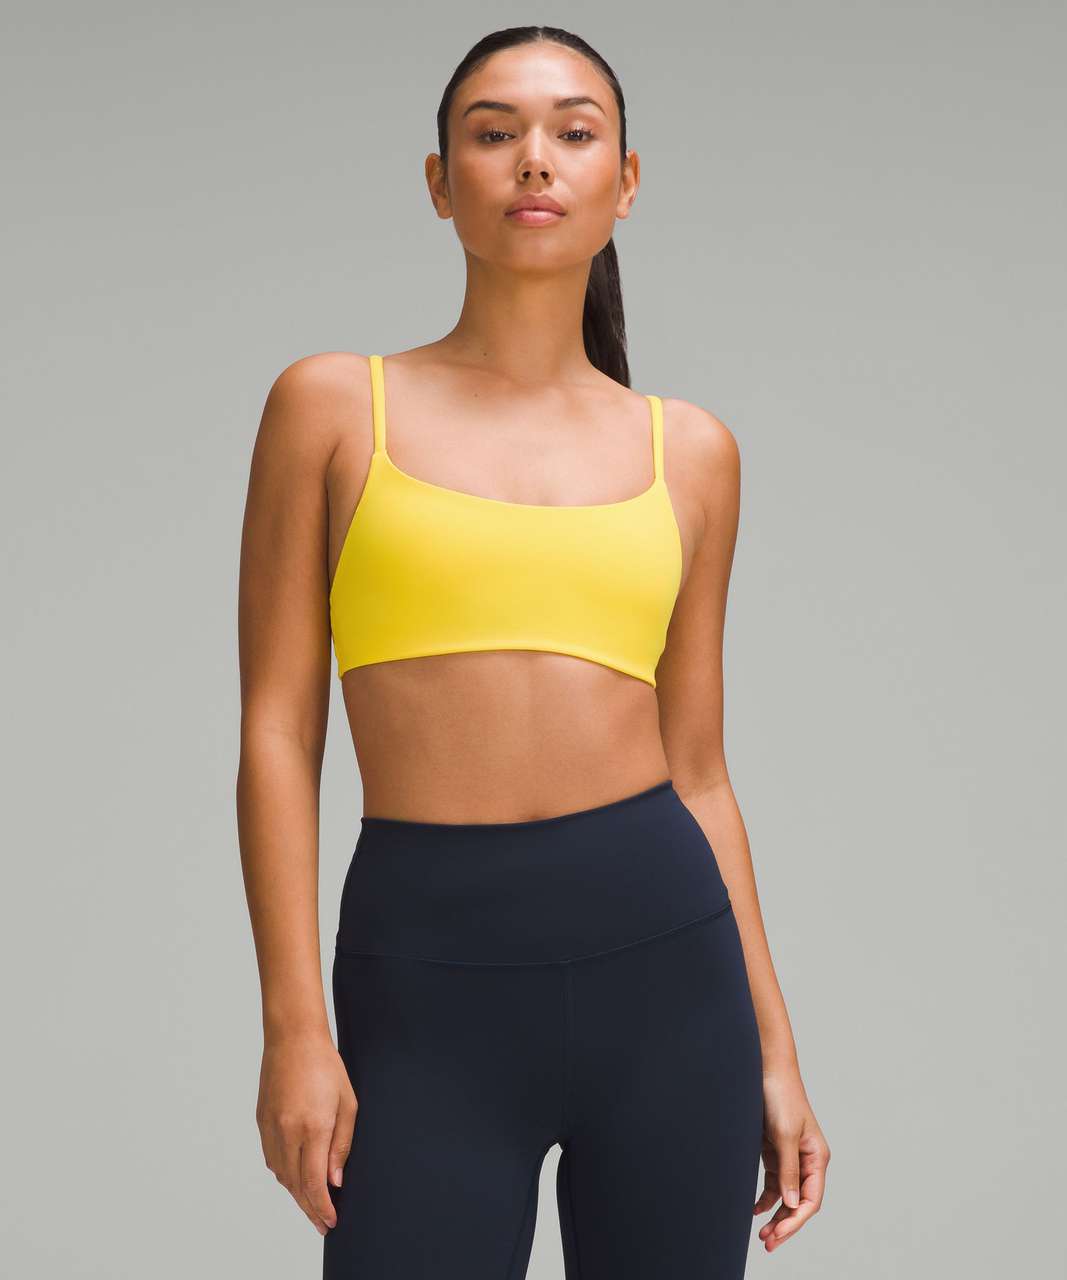 Lululemon Wunder Train Strappy Racer Bra *Light Support, A/B Cup - Utility Yellow